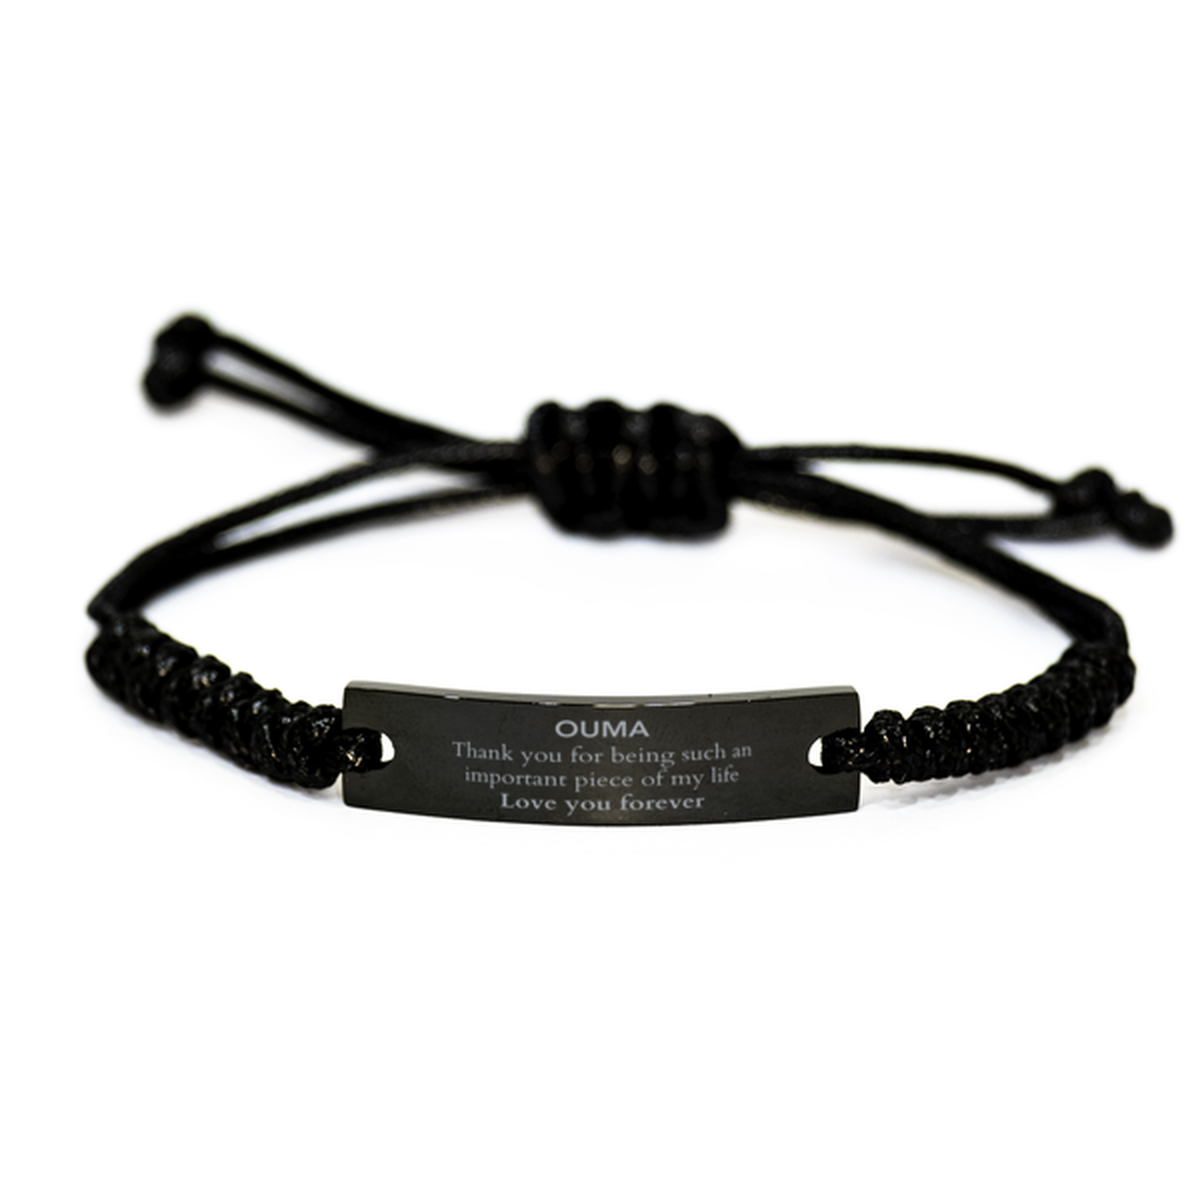 Appropriate Ouma Black Rope Bracelet Epic Birthday Gifts for Ouma Thank you for being such an important piece of my life Ouma Christmas Mothers Fathers Day